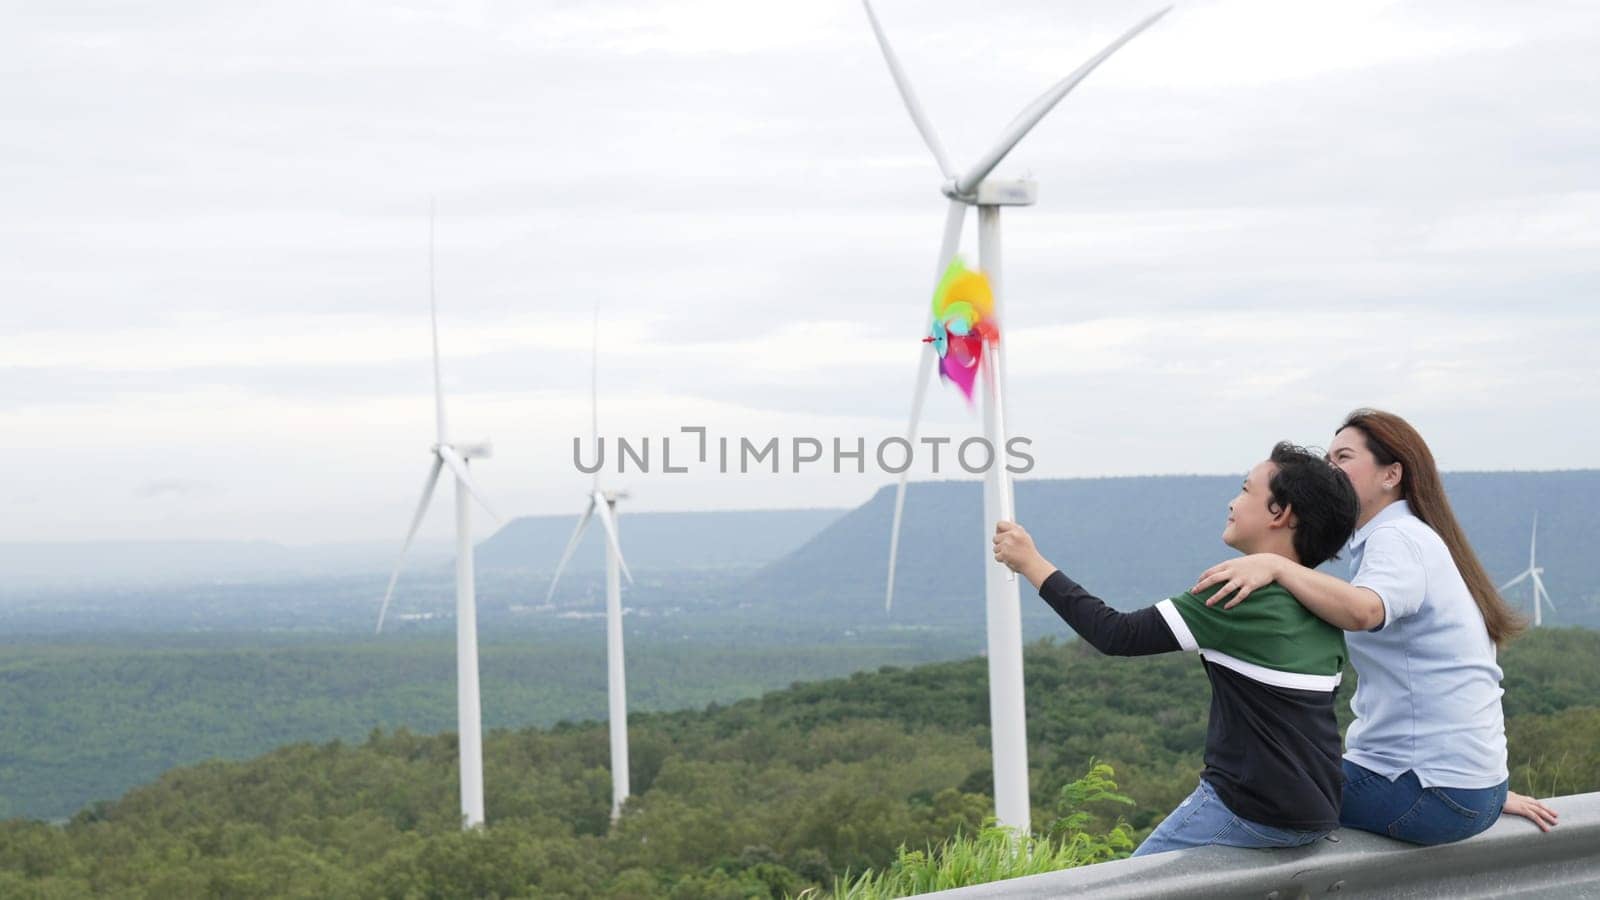 Progressive happy mother and her son at the wind turbine farm. Electric generator from wind by wind turbine generator on the country side with hill and mountain on the horizon.